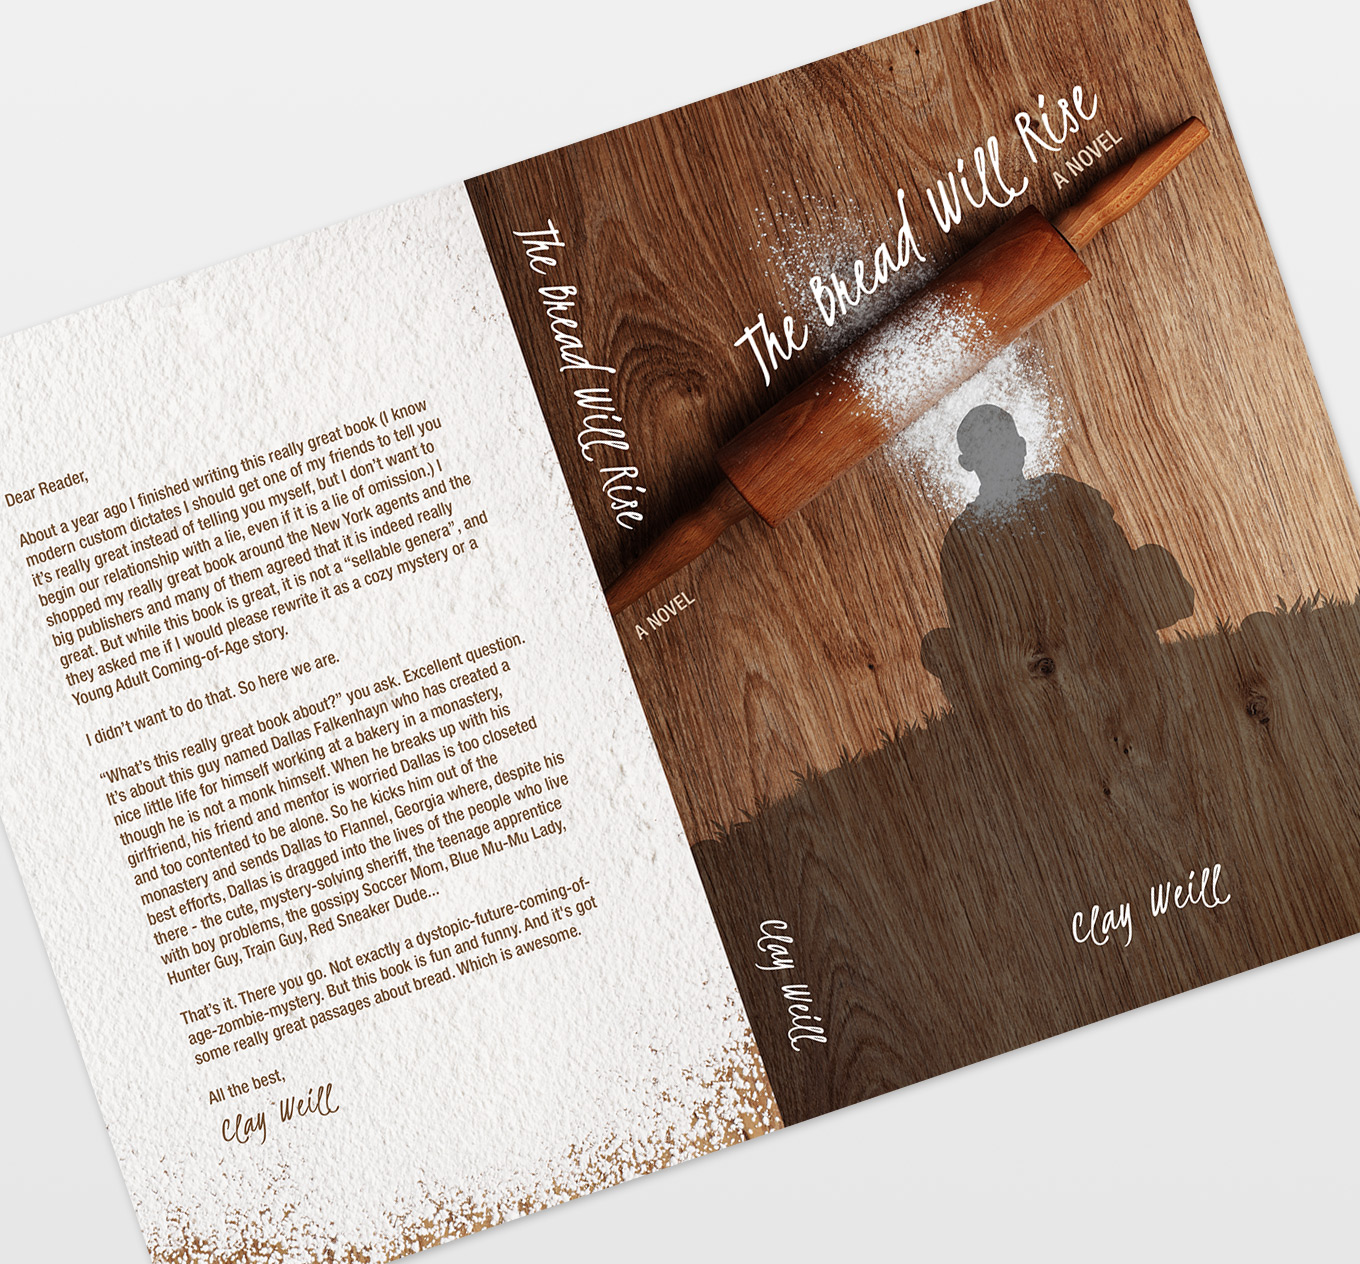 The Bread Will Rise Book Jacket